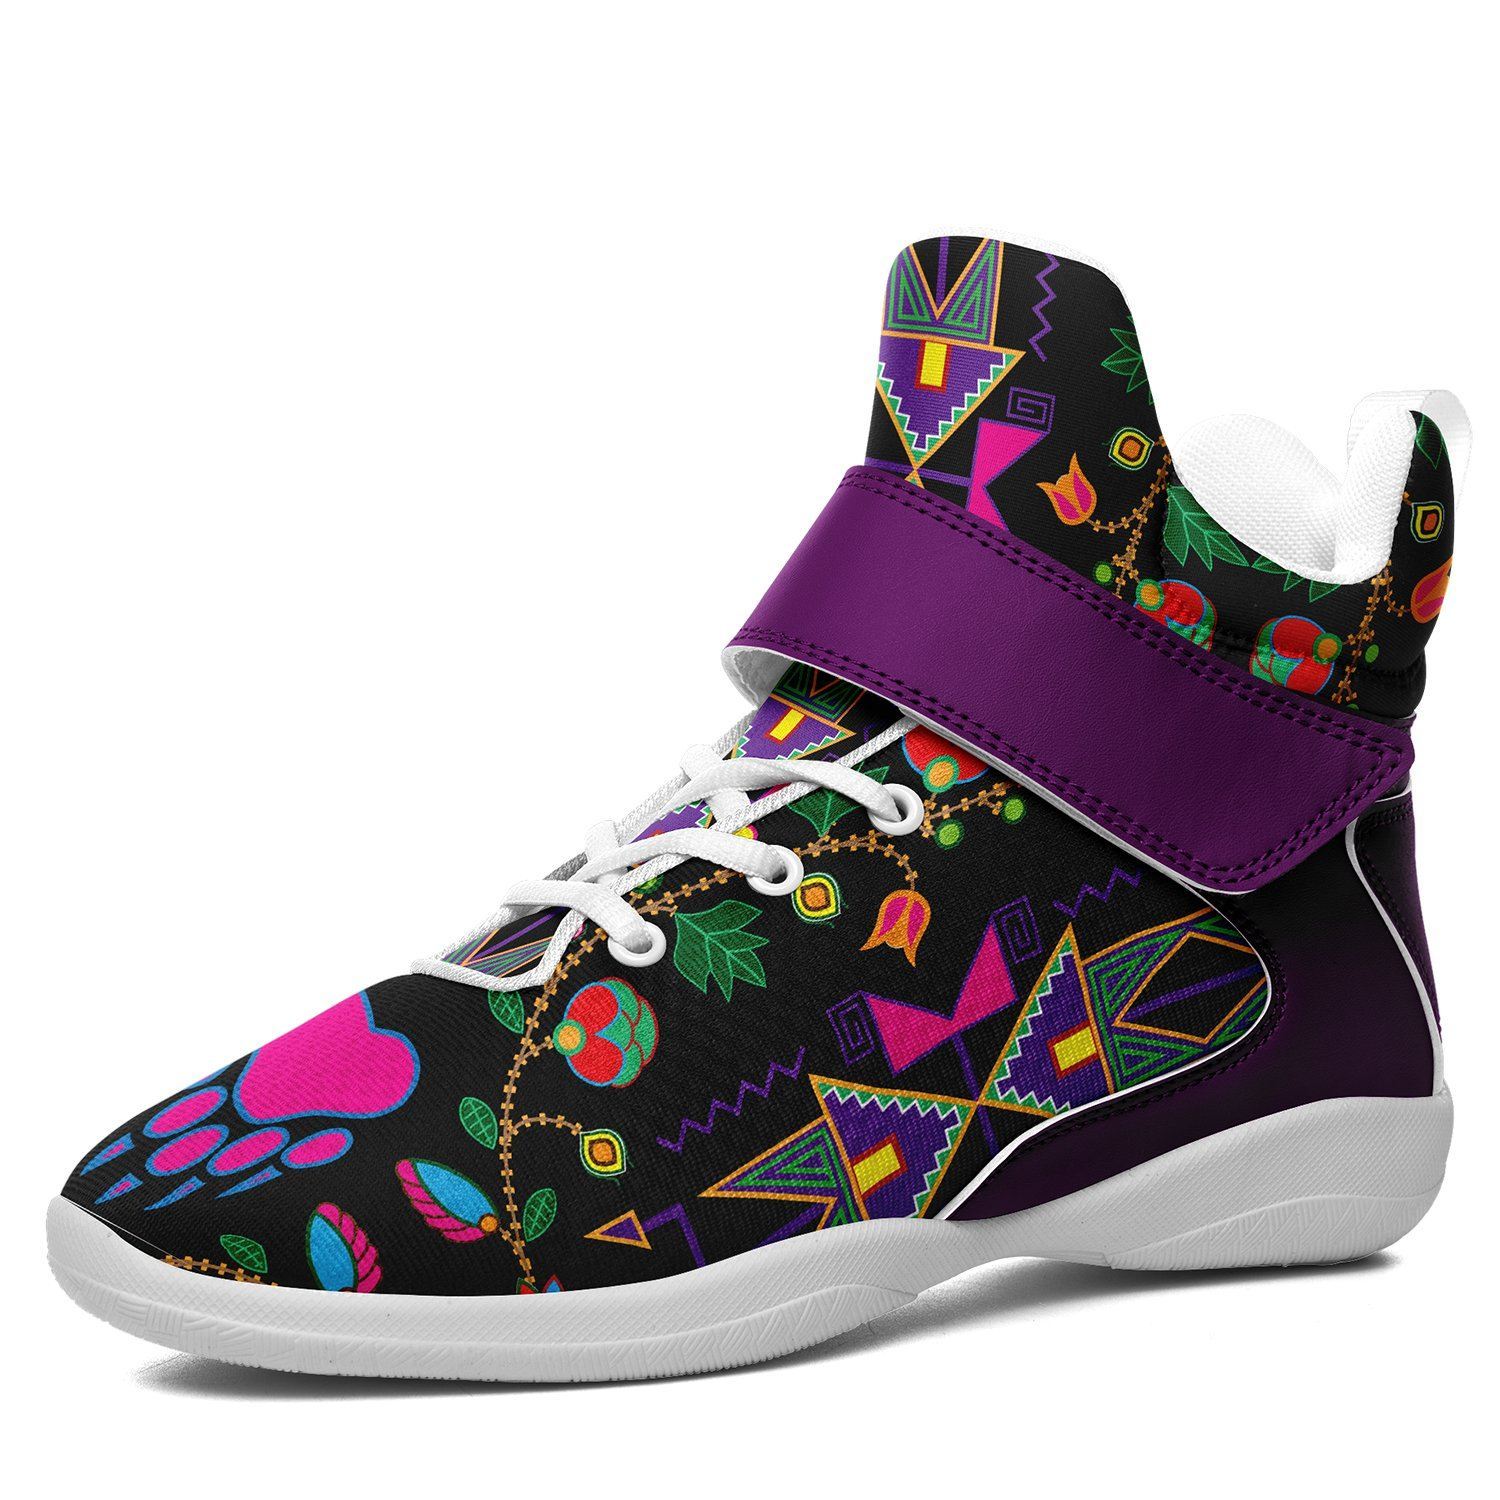 Geometric Floral Fall Black Ipottaa Basketball / Sport High Top Shoes - White Sole 49 Dzine US Women 8.5 / US Men 7 / EUR 40 White Sole with Indigo Strap 